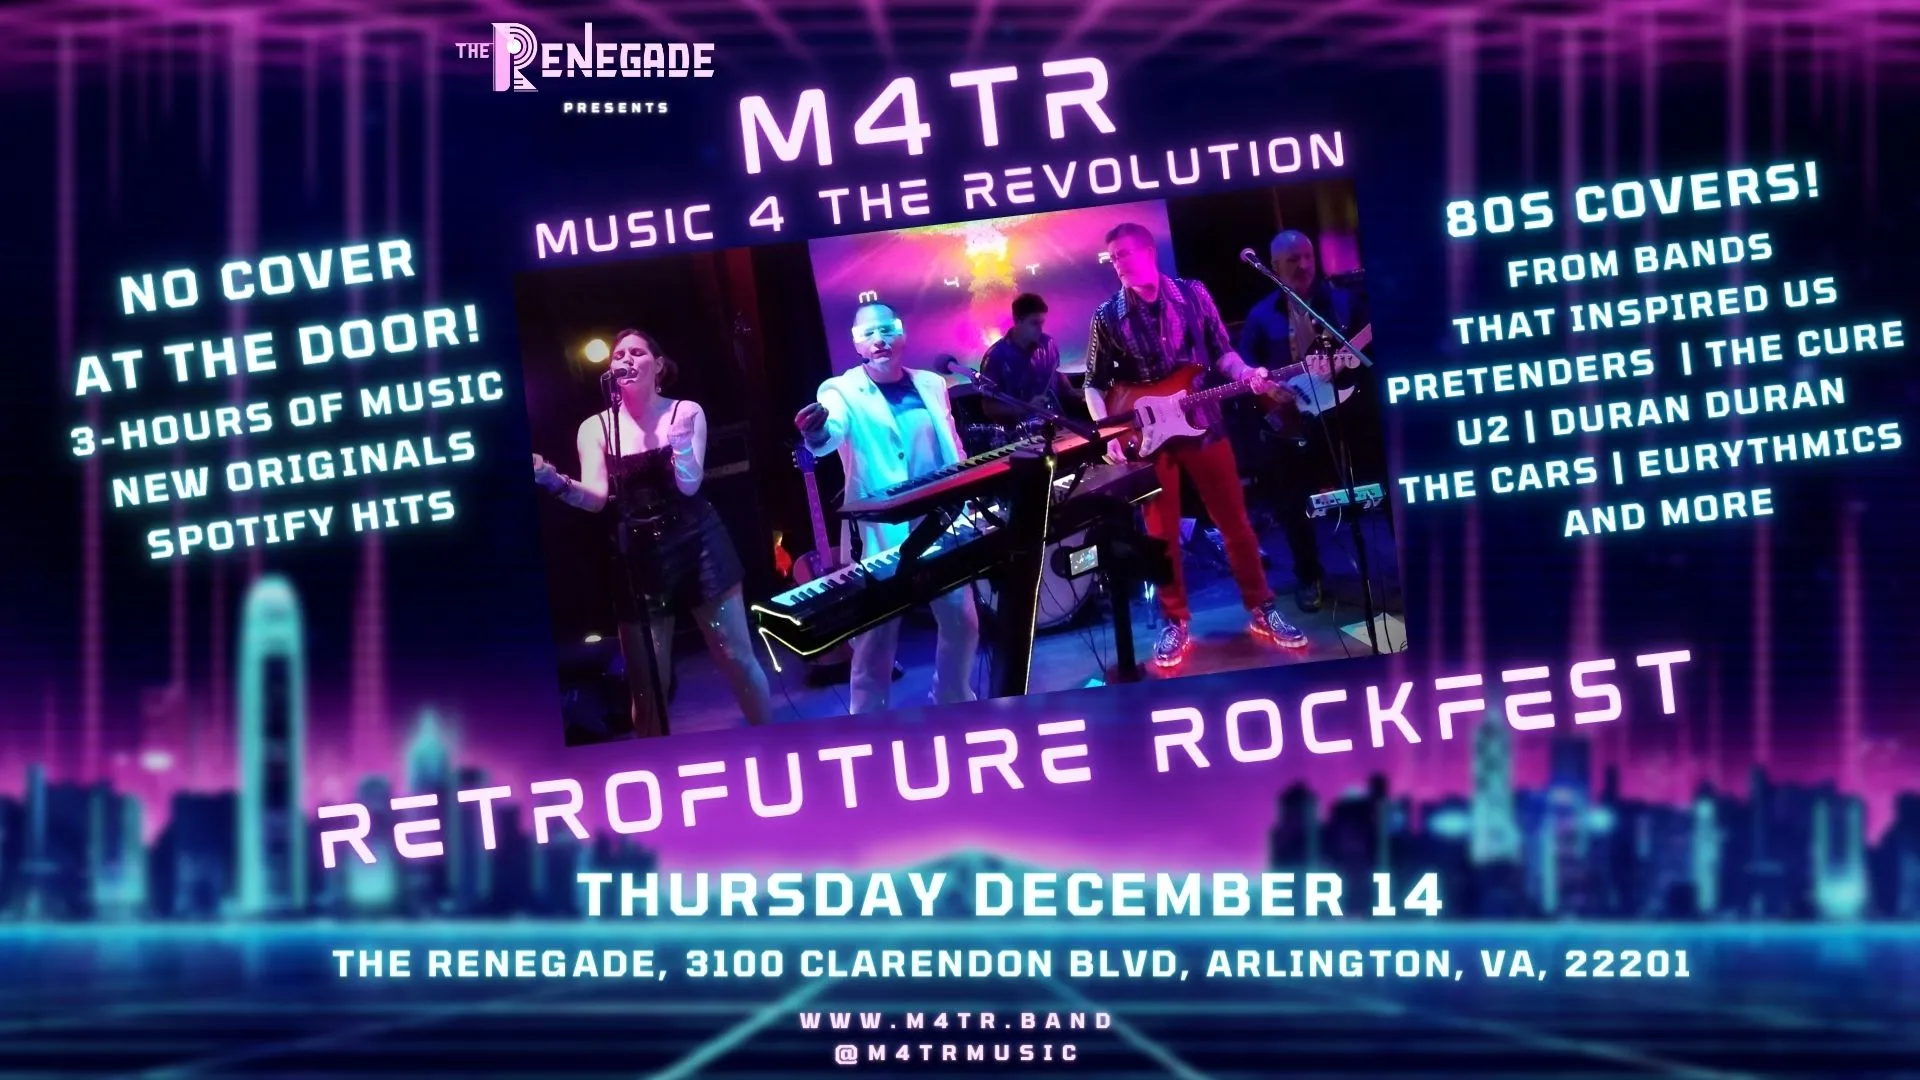 DC’s M4TR Plans to Bring the Retrofuture to The Renegade VA featured image